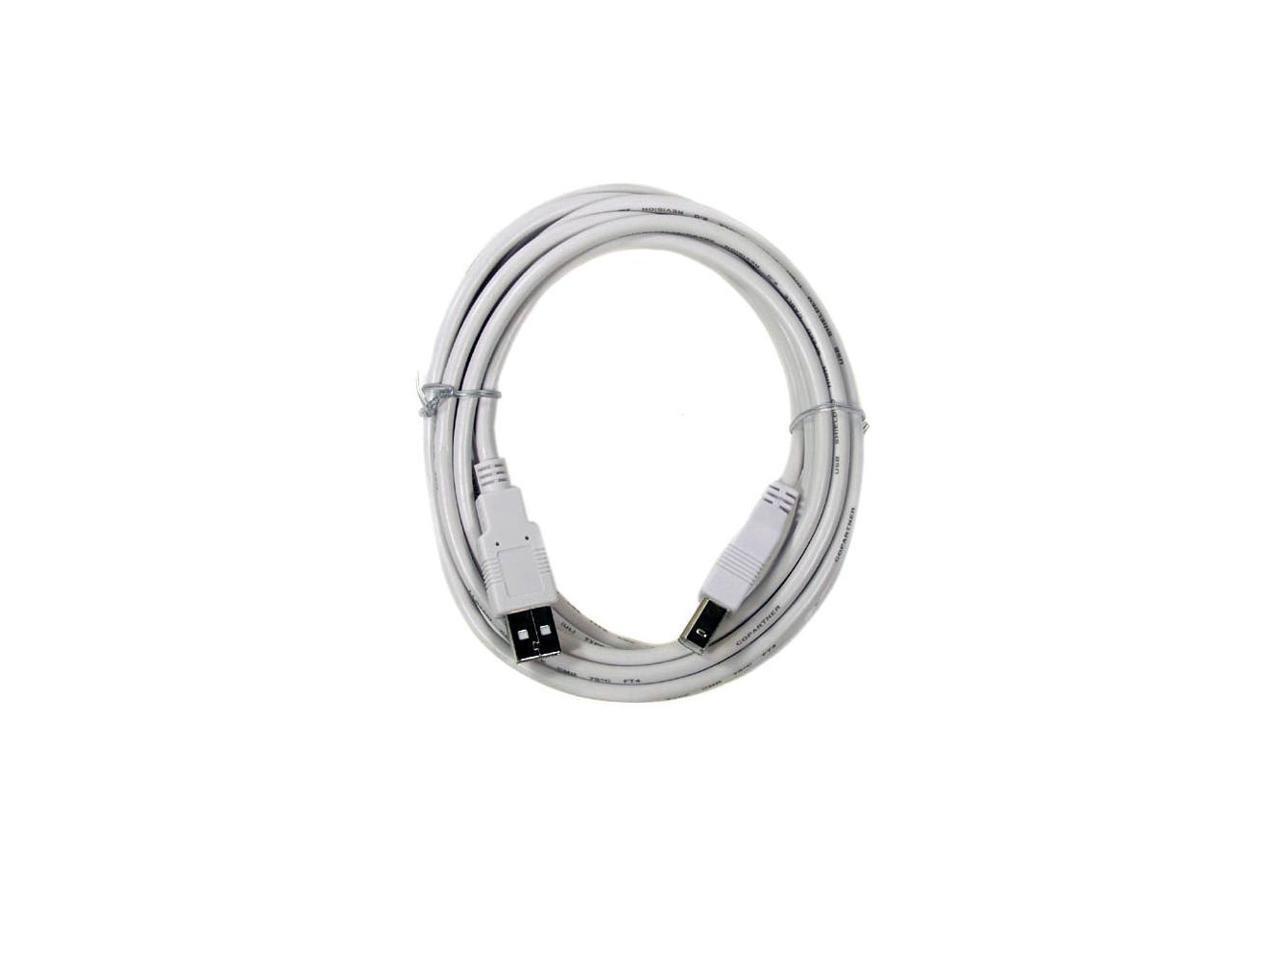 Fuji Labs 10Ft A-Male to B-Male USB2.0 Cable (3 Pack)